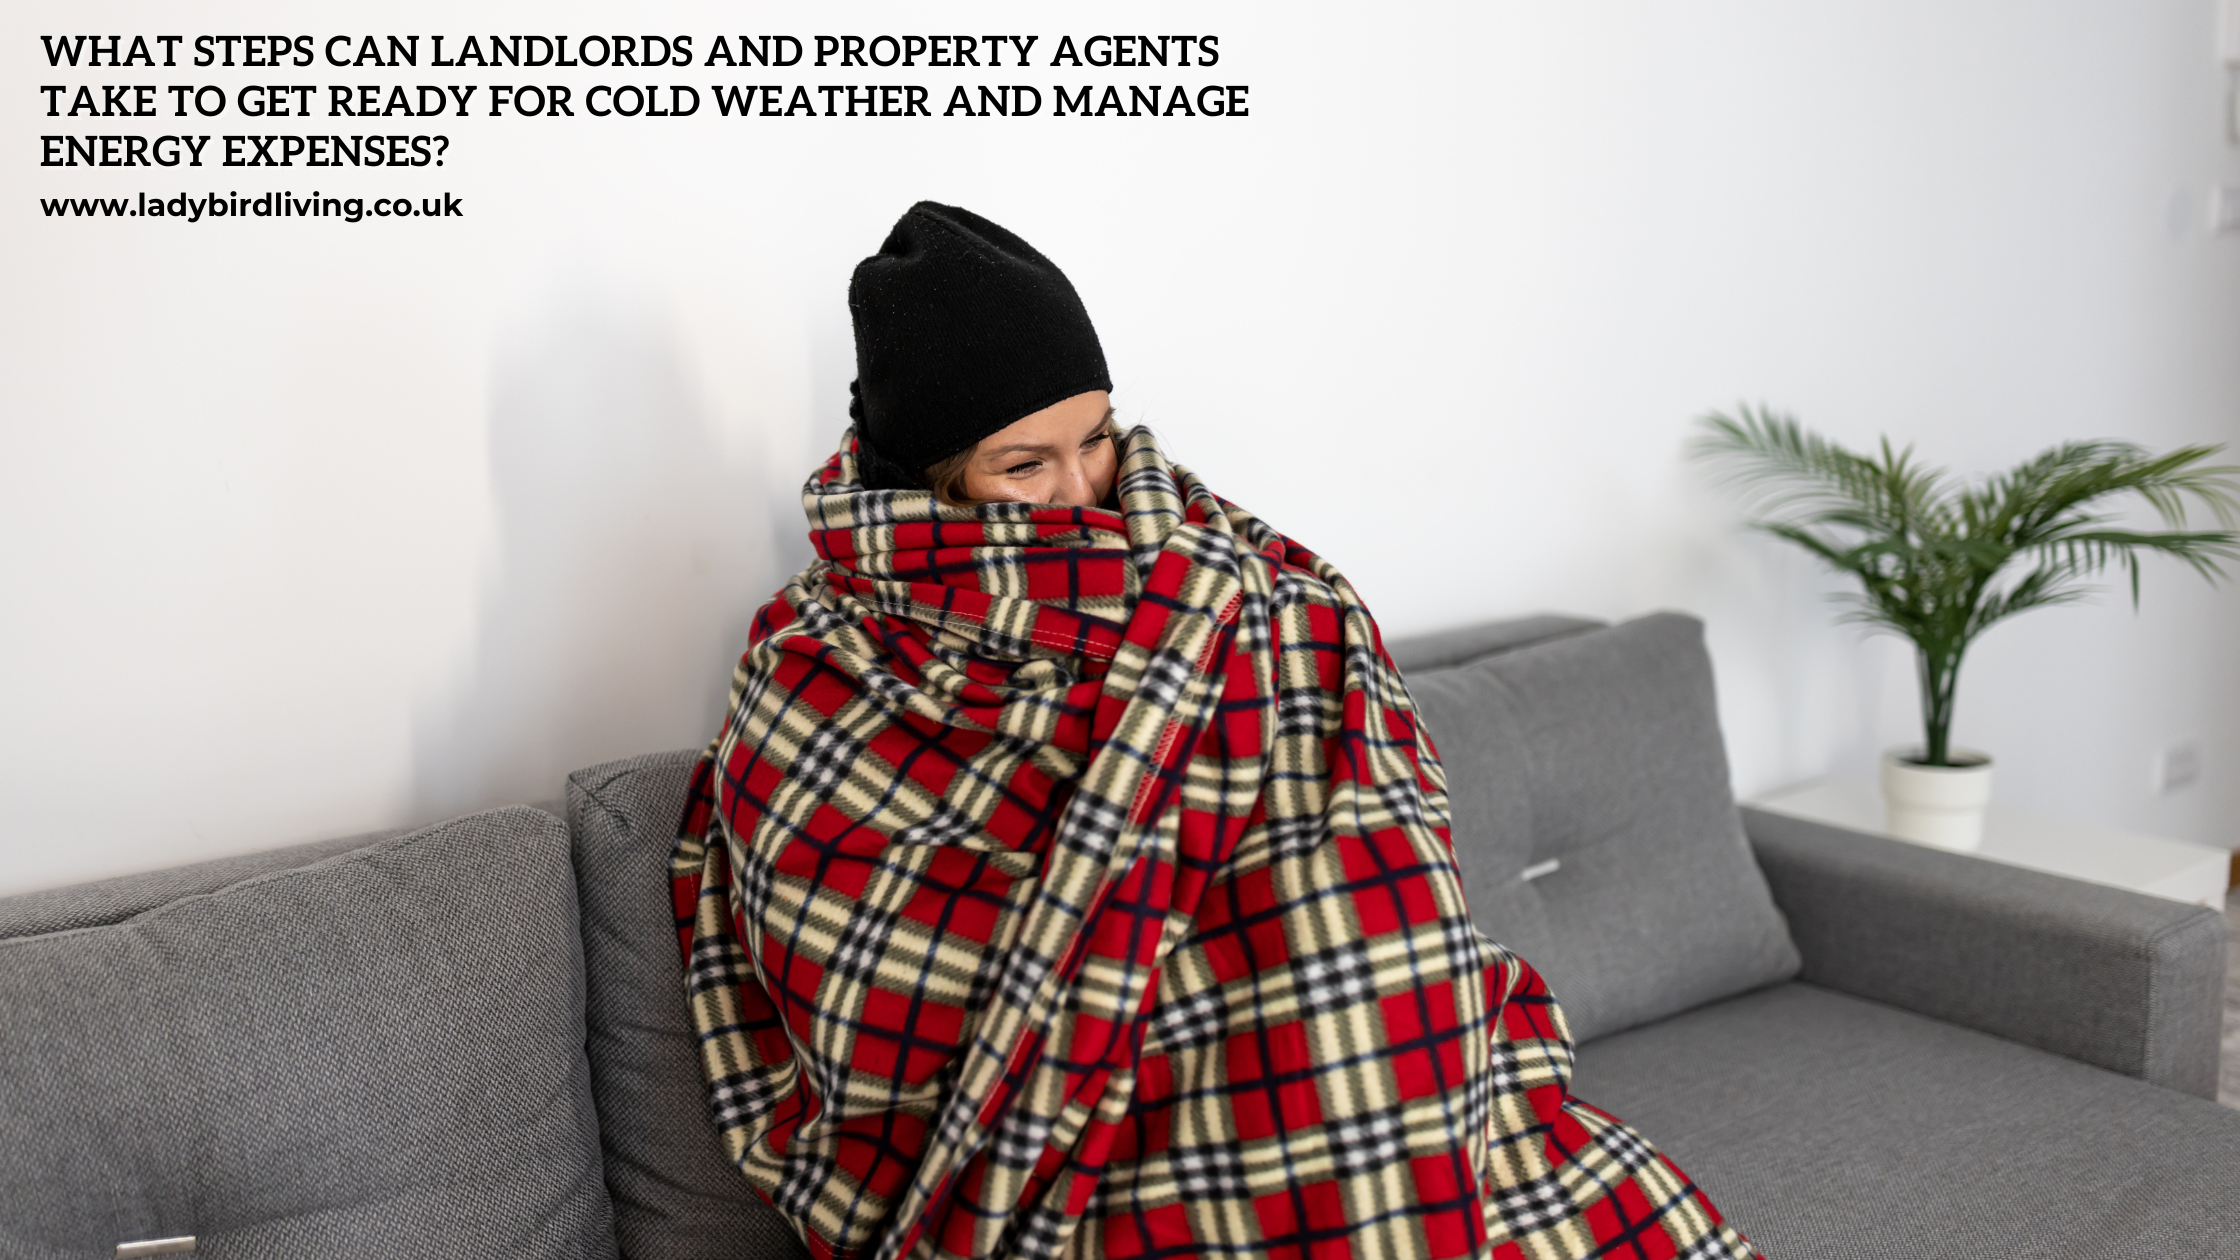 What steps can landlords and property agents take to get ready for cold weather and manage energy expenses?